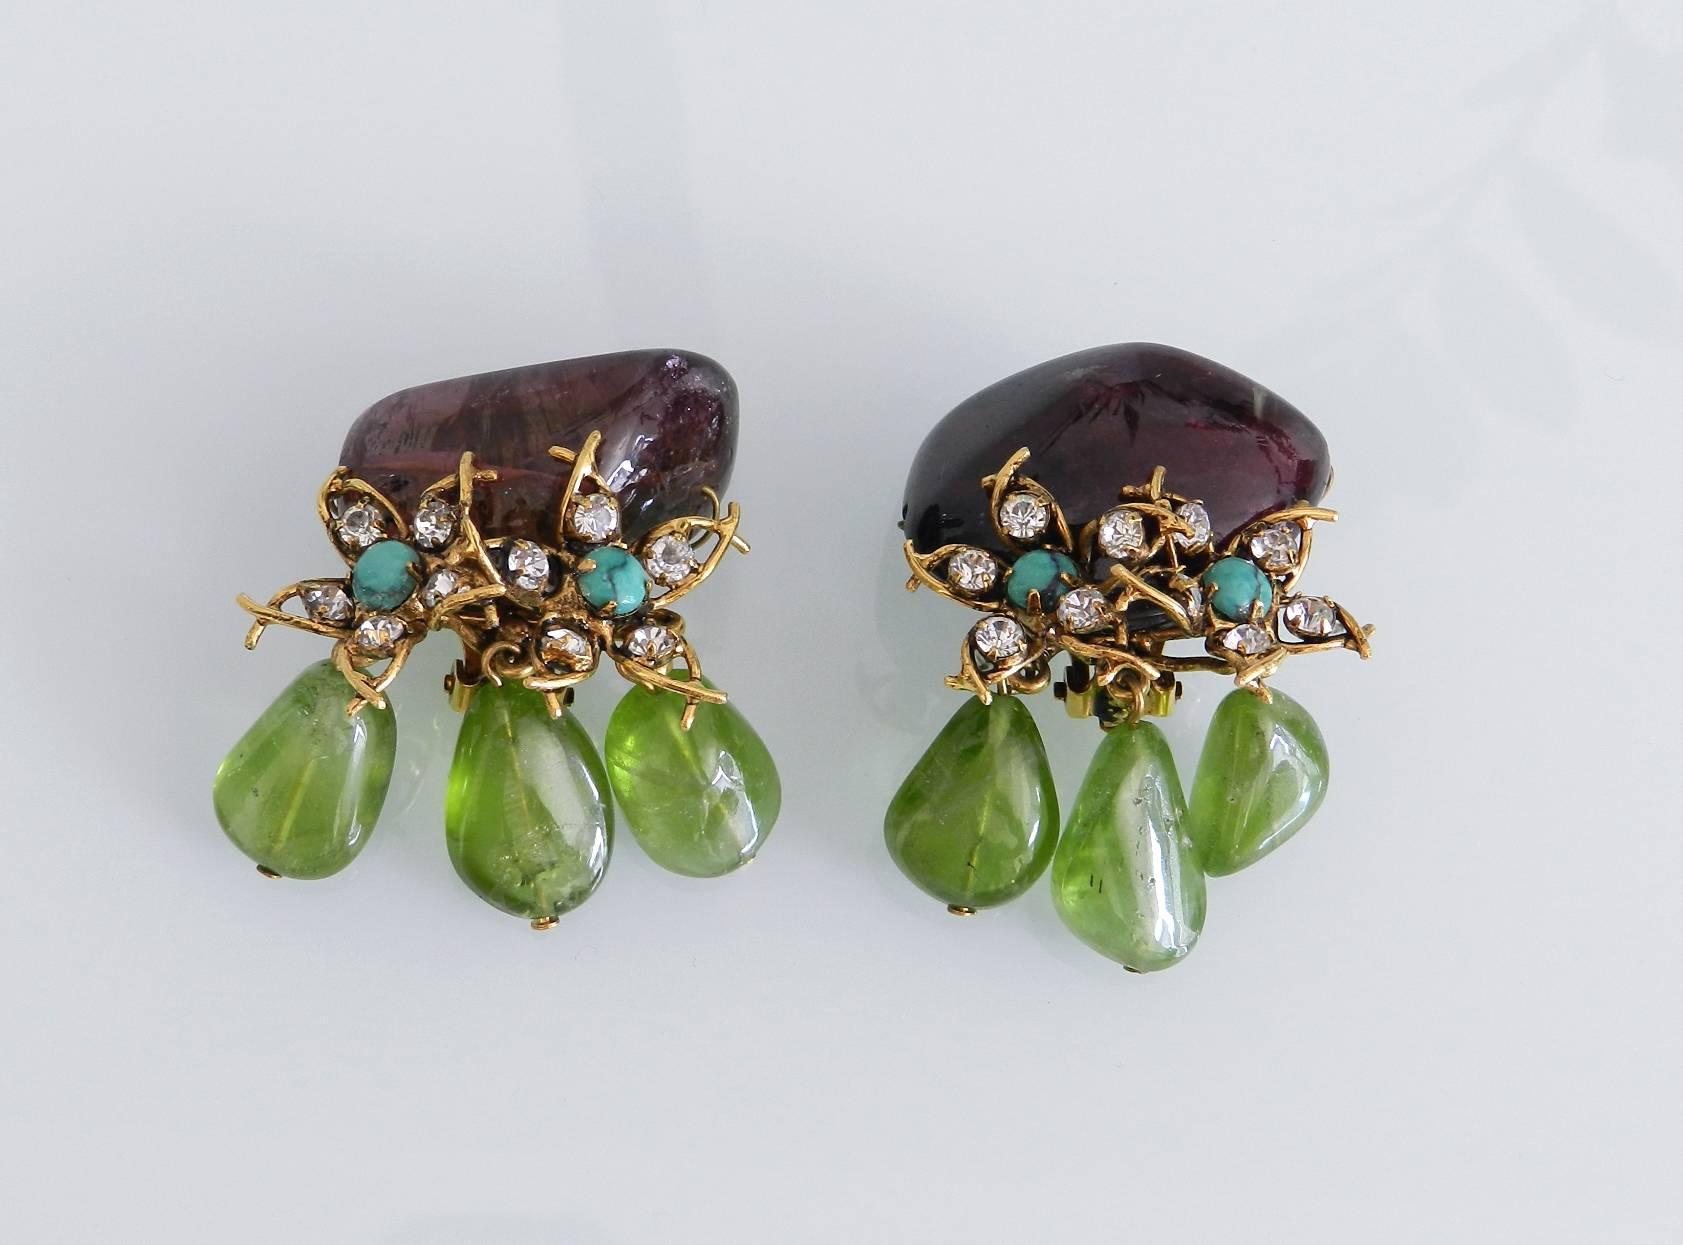 Iradj Moini amethyst and peridot beaded clip earrings. Goldstone metal with clear rhinestones and turquoise. Excellent condition. Measures about 1.75